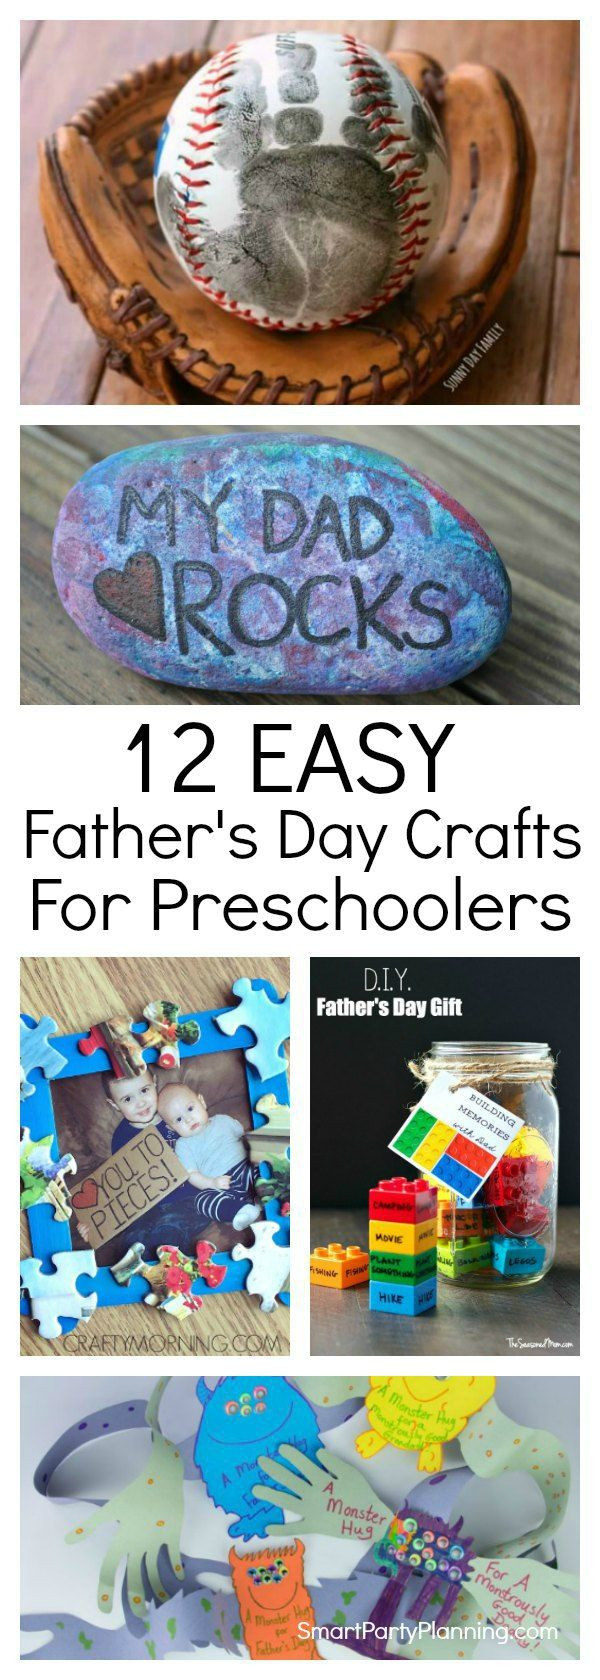 Father'S Day Gift Ideas From Preschoolers
 Best 25 Dad crafts ideas on Pinterest